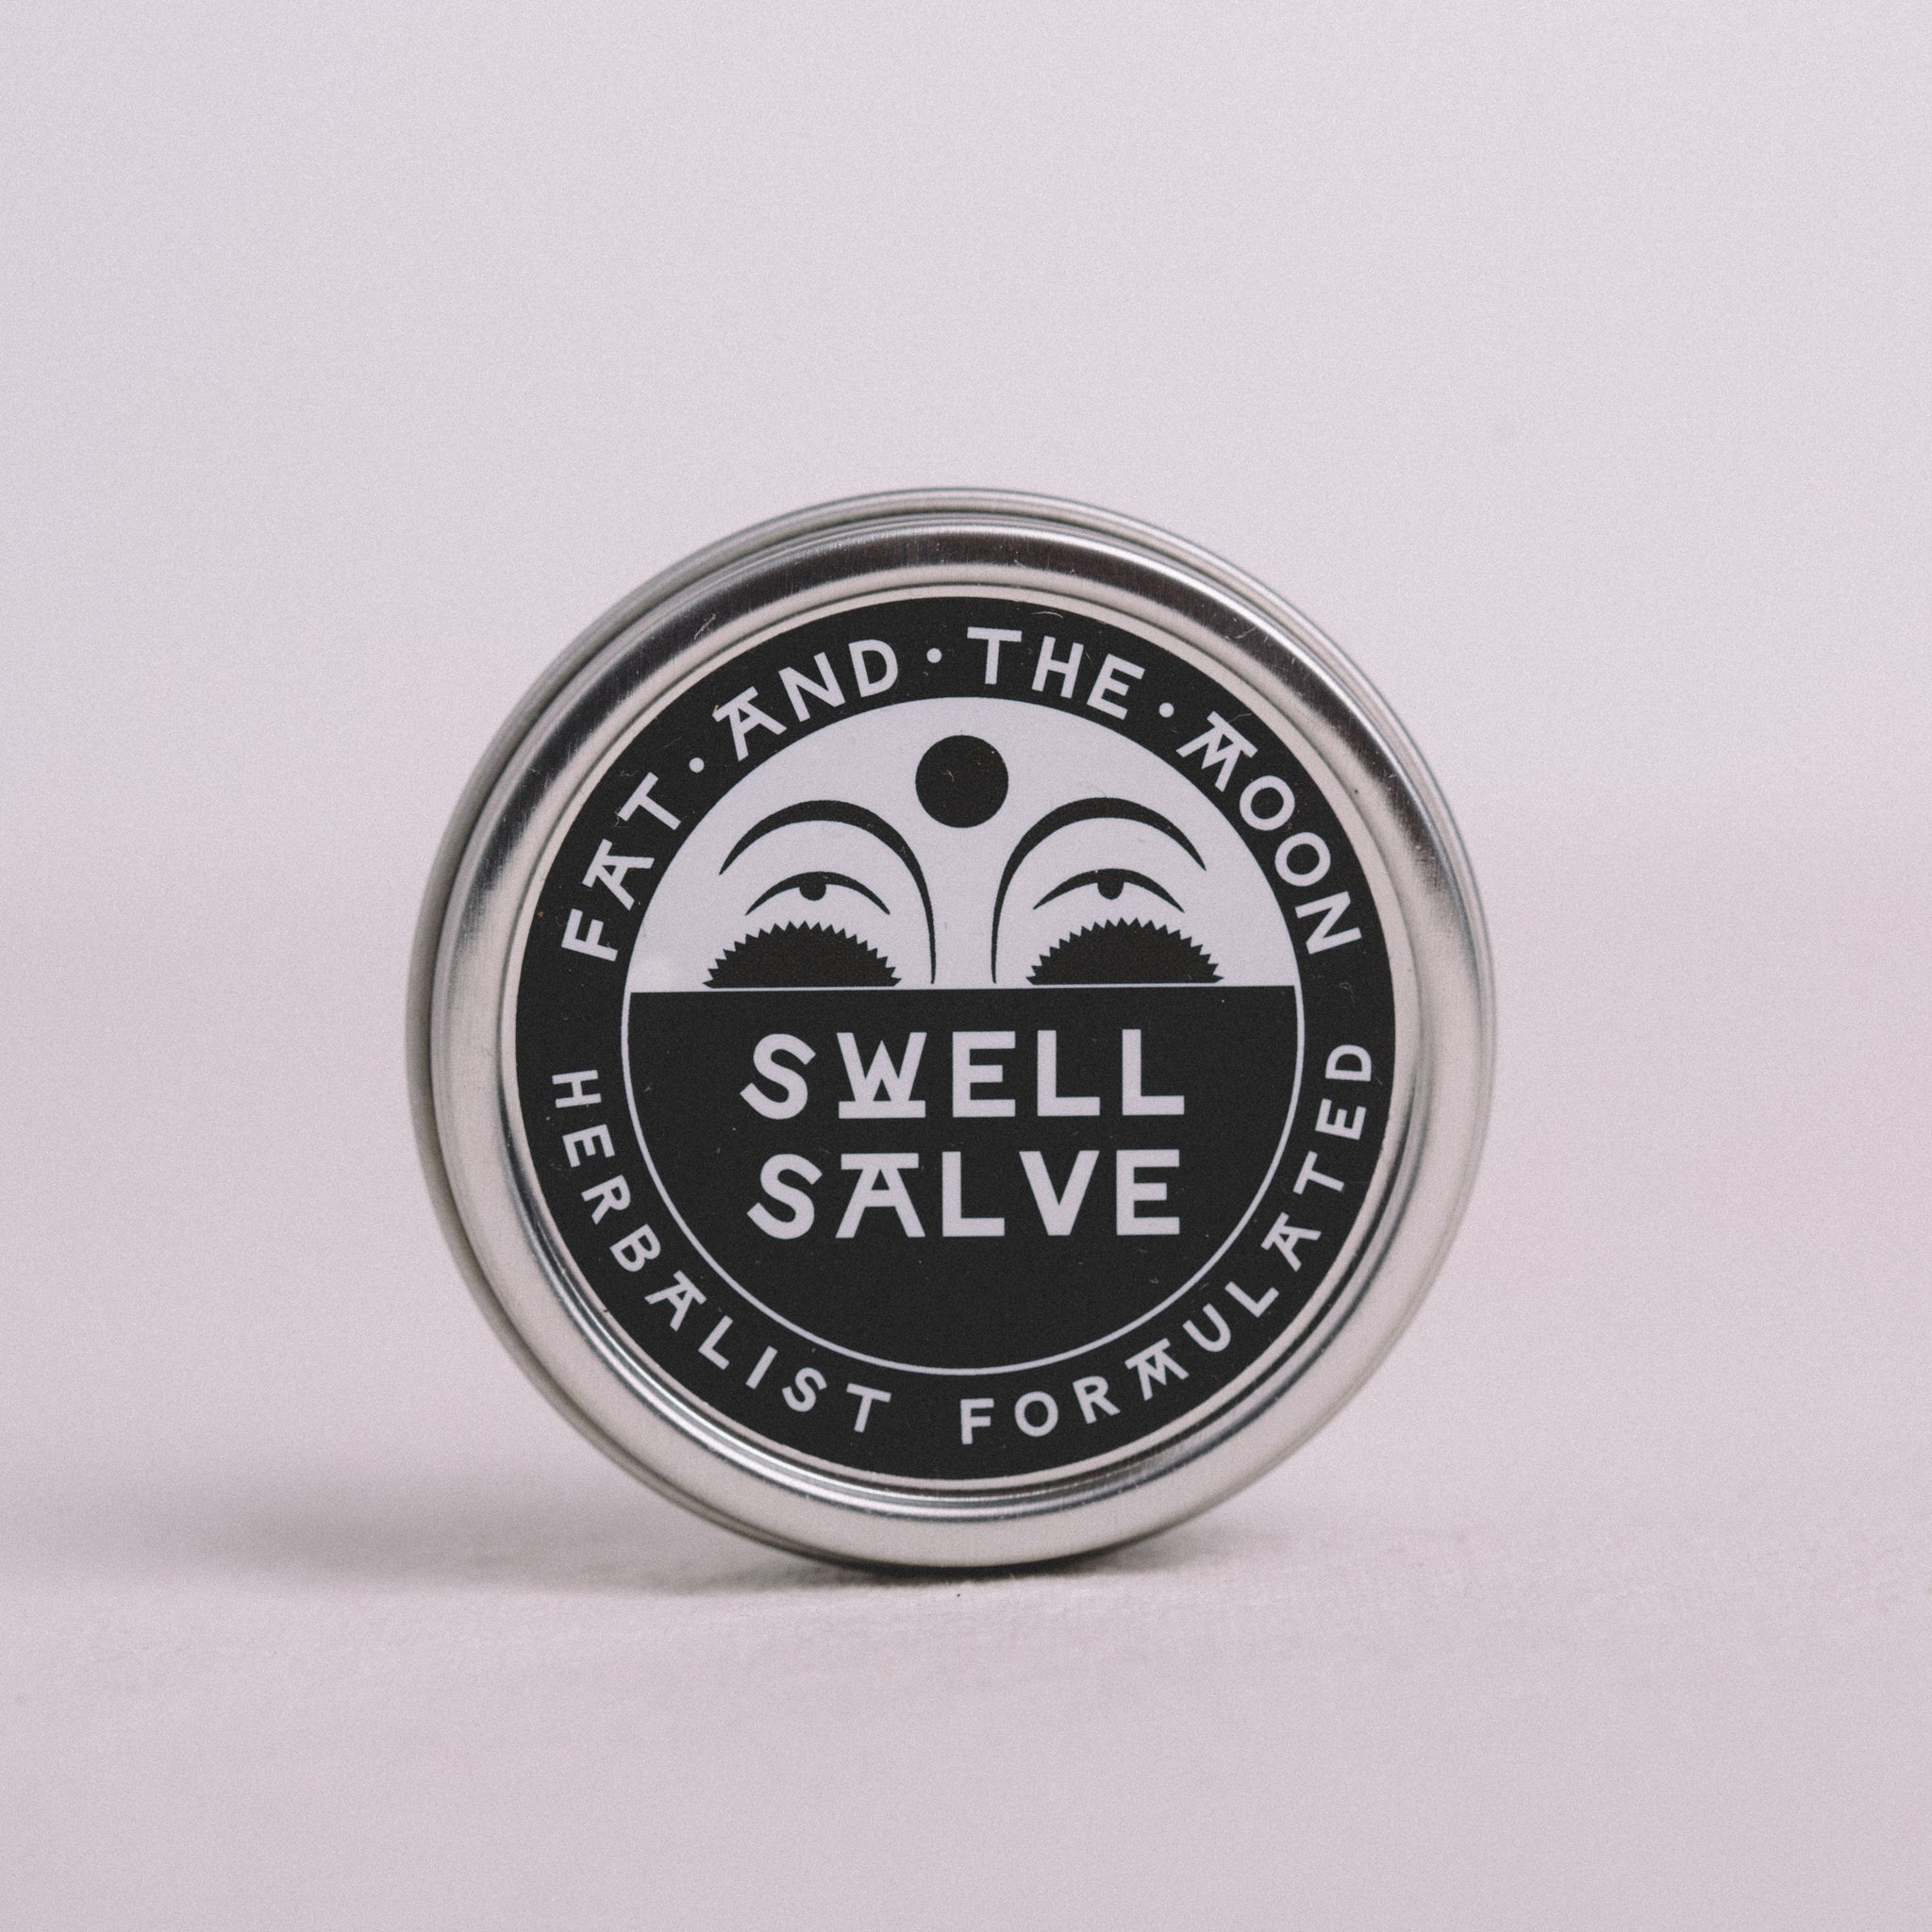 SWELL SALVE || FAT AND THE MOON